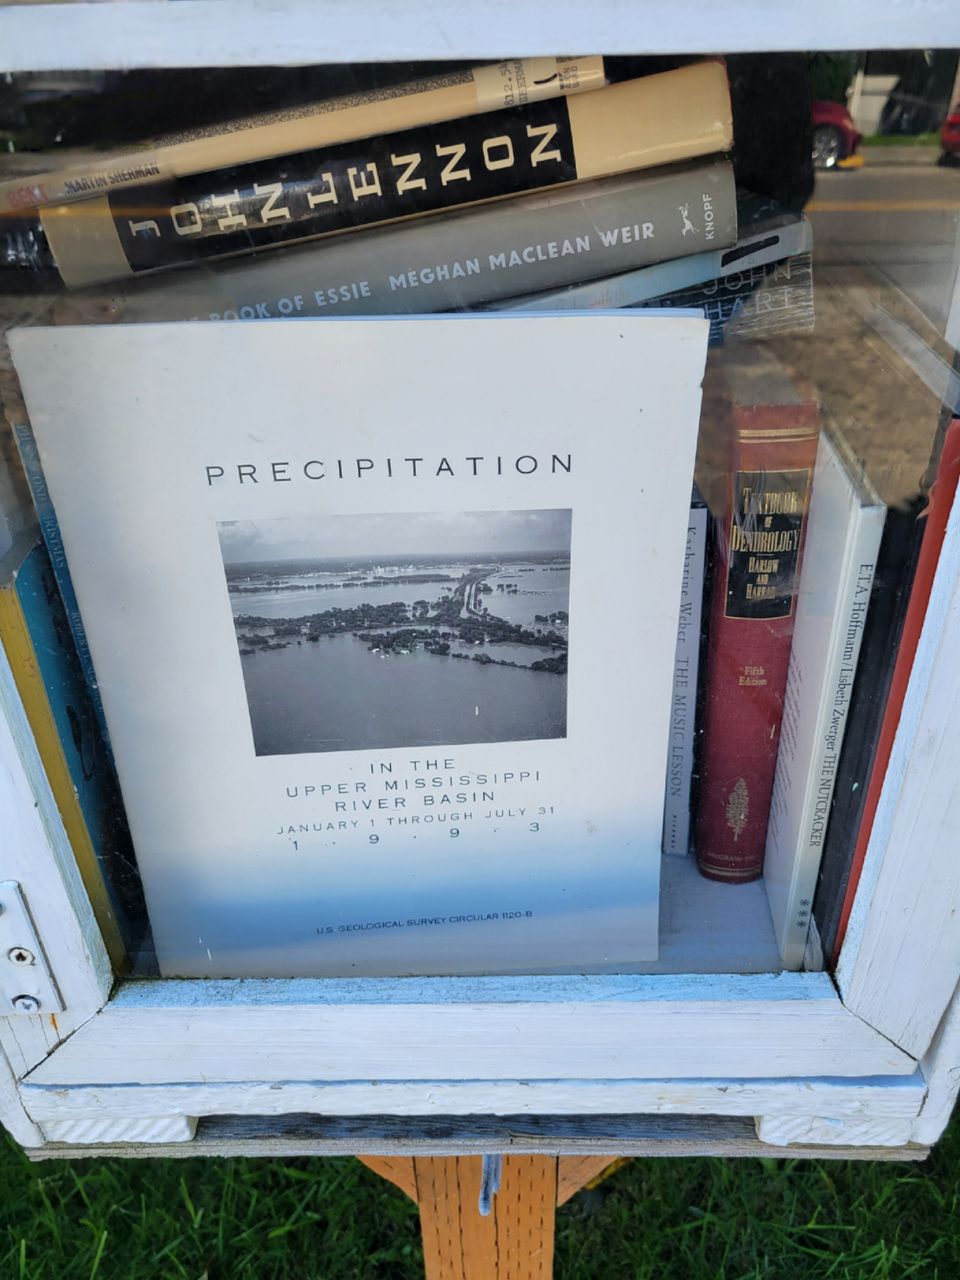 An image of a pamphlet "Precipitation in the upper Mississippi River basin, January 1 through July 31 1993."